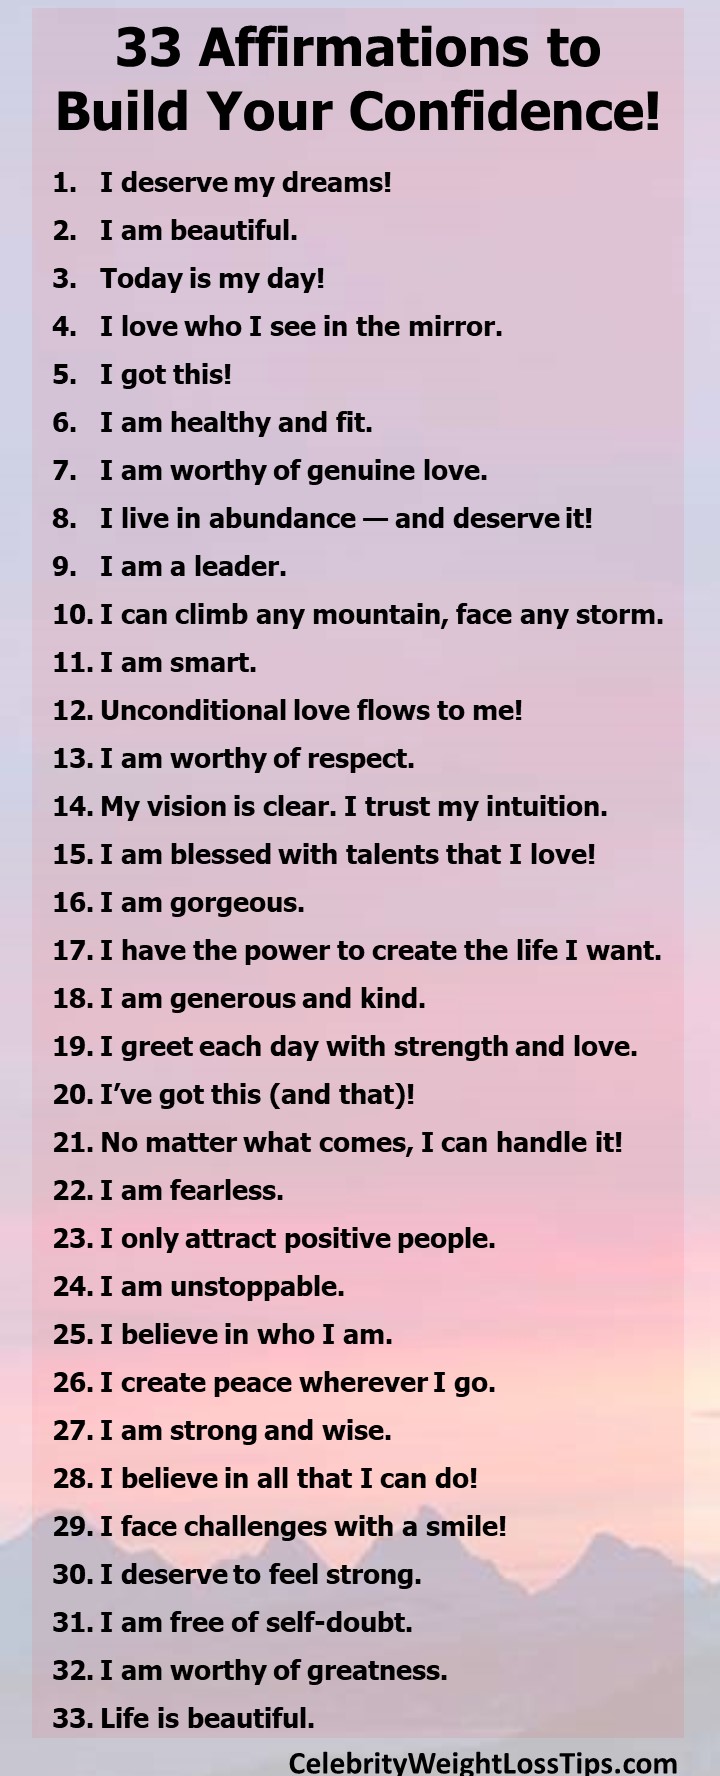 33 affirmations to build your confidence, live your dreams, inspire your health and fitness, and move beyond today to tomorrow and beyond!